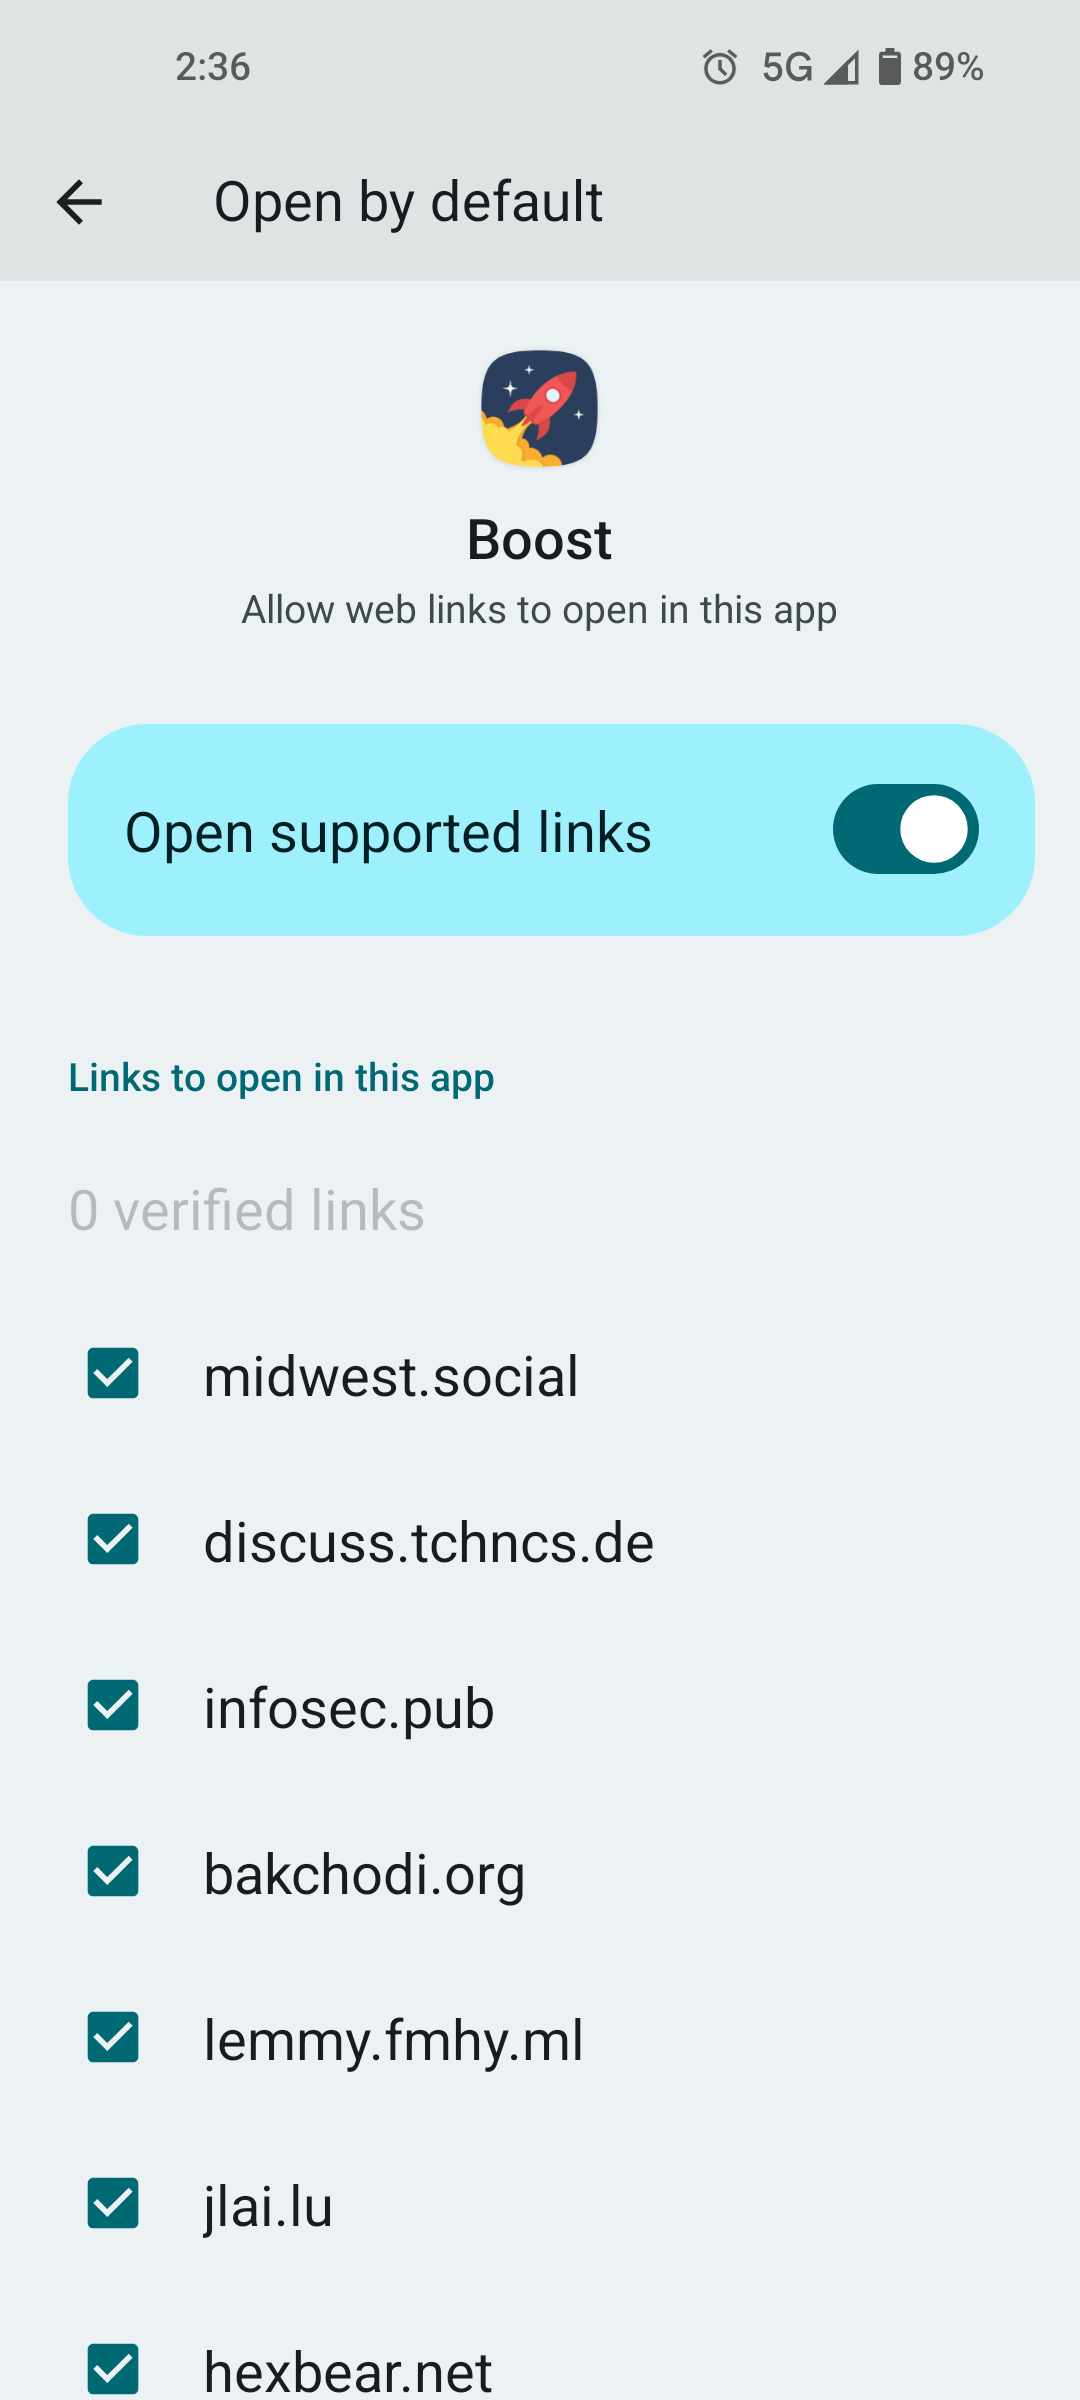 "Open by default" settings page for Boost